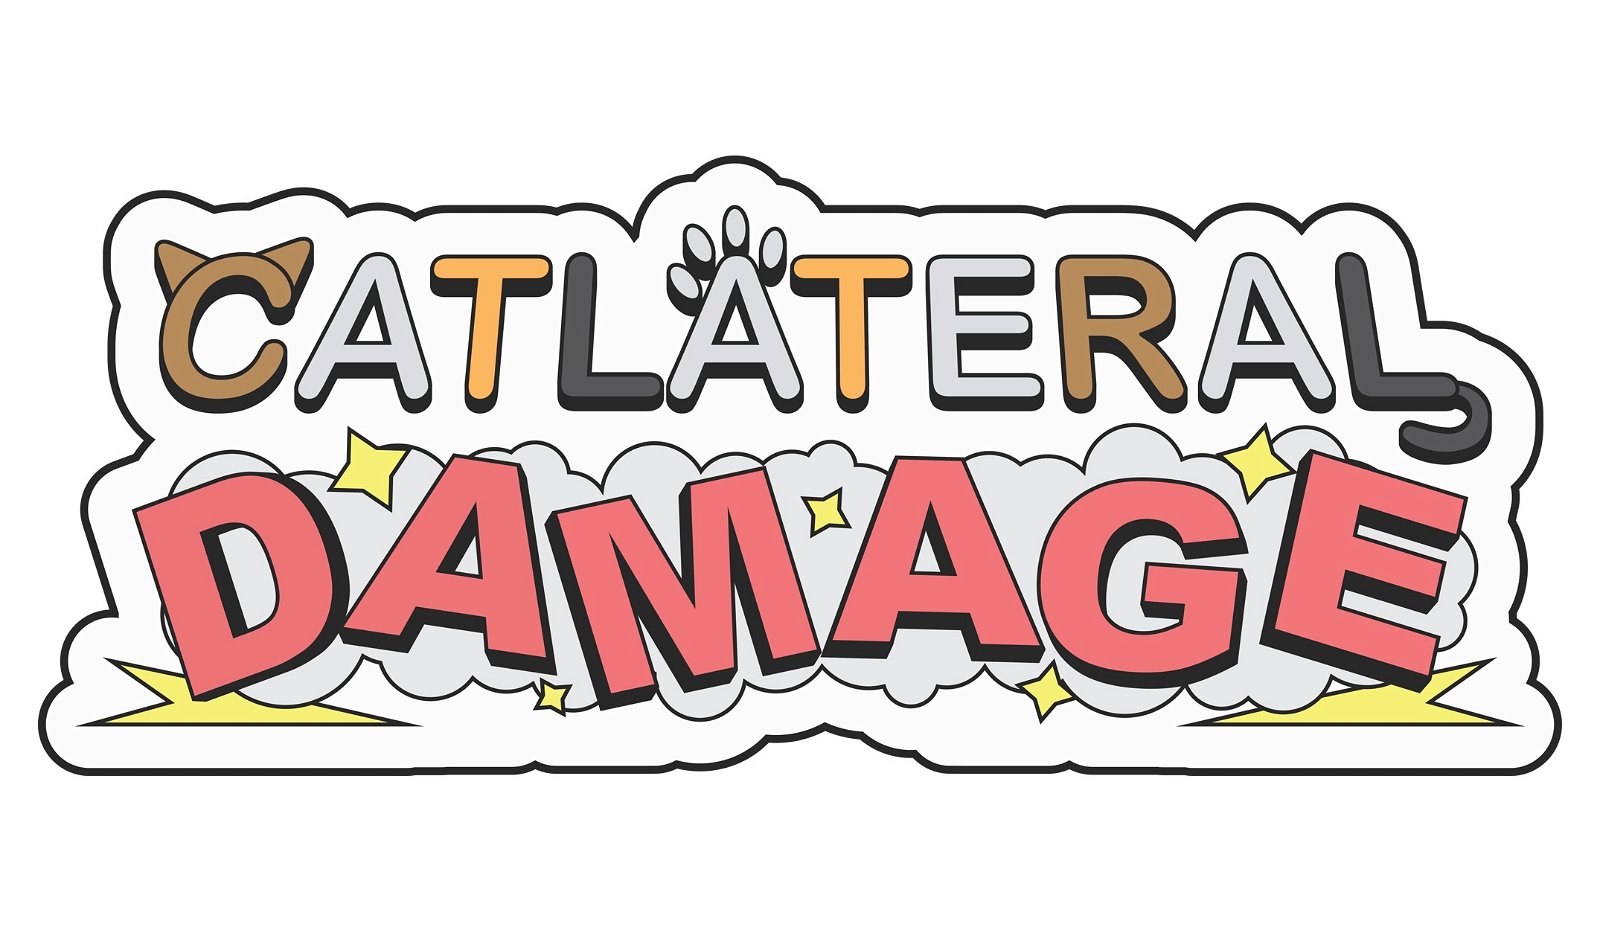 Image of Catlateral Damage